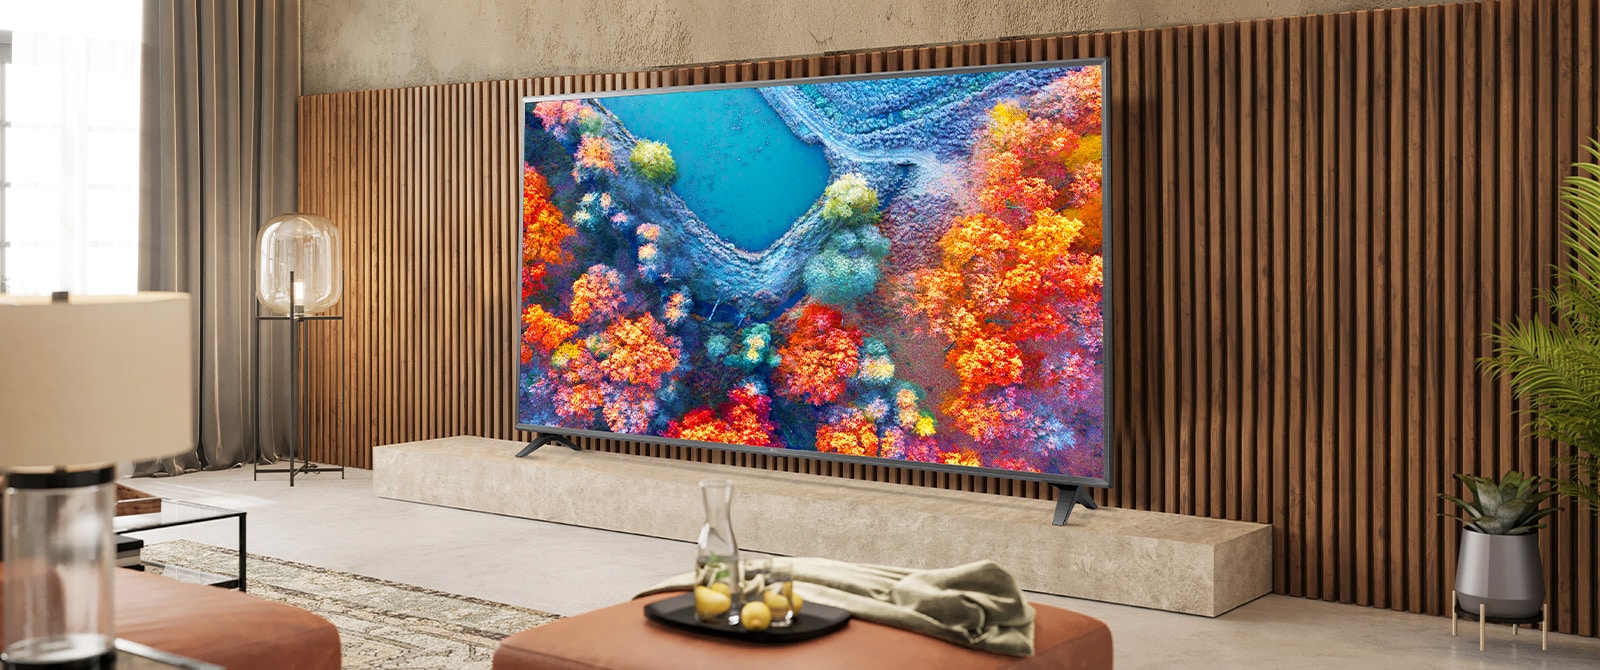 In the living room, there is a slim bezel TV, and the TV’s vivid screen pairs well with the interior.